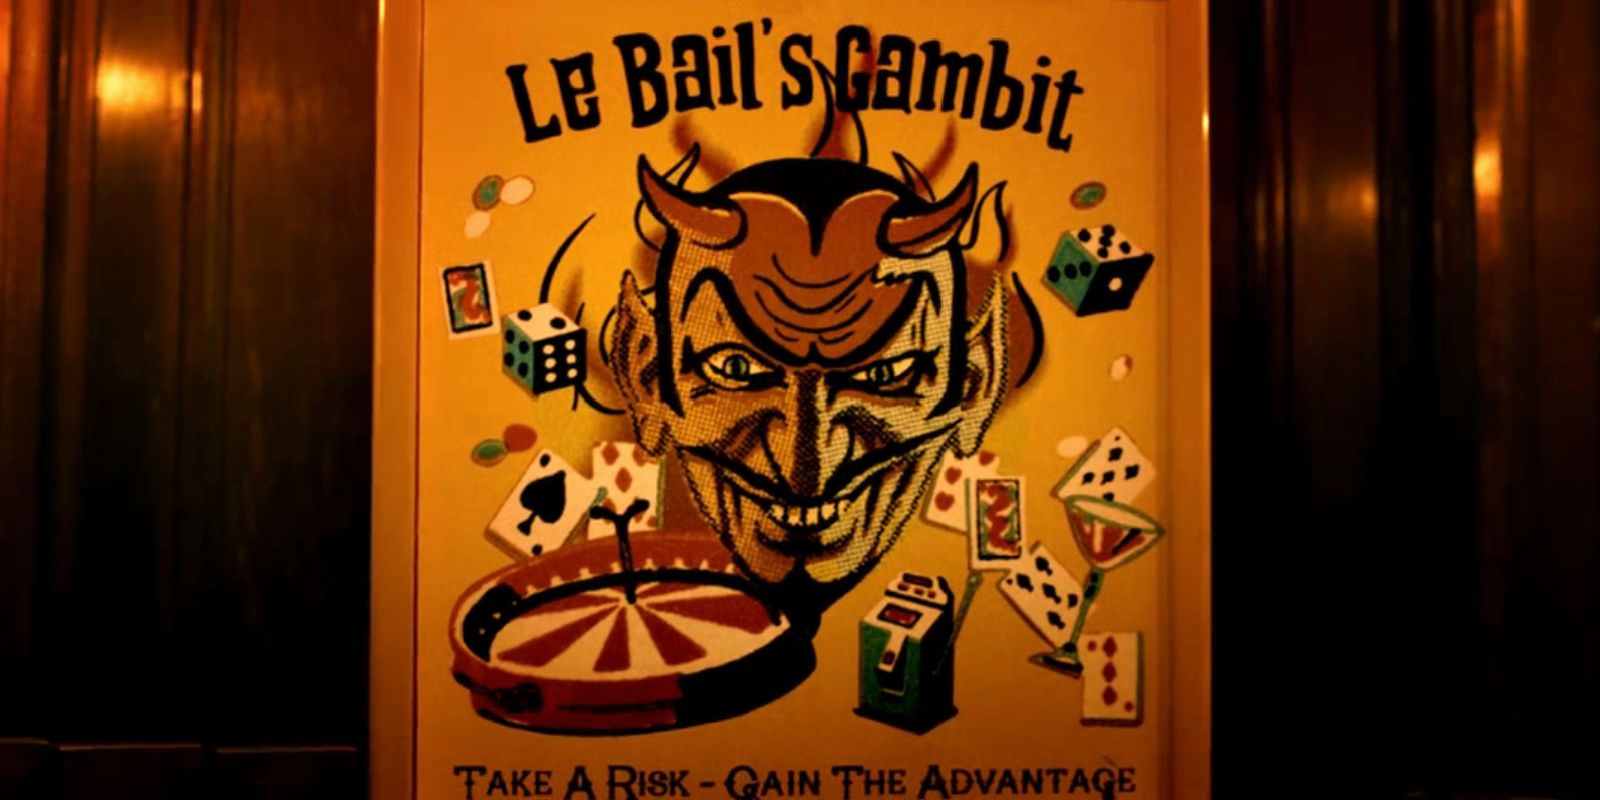 Who Is Le Bail? Ready Or Not’s Demon Explained